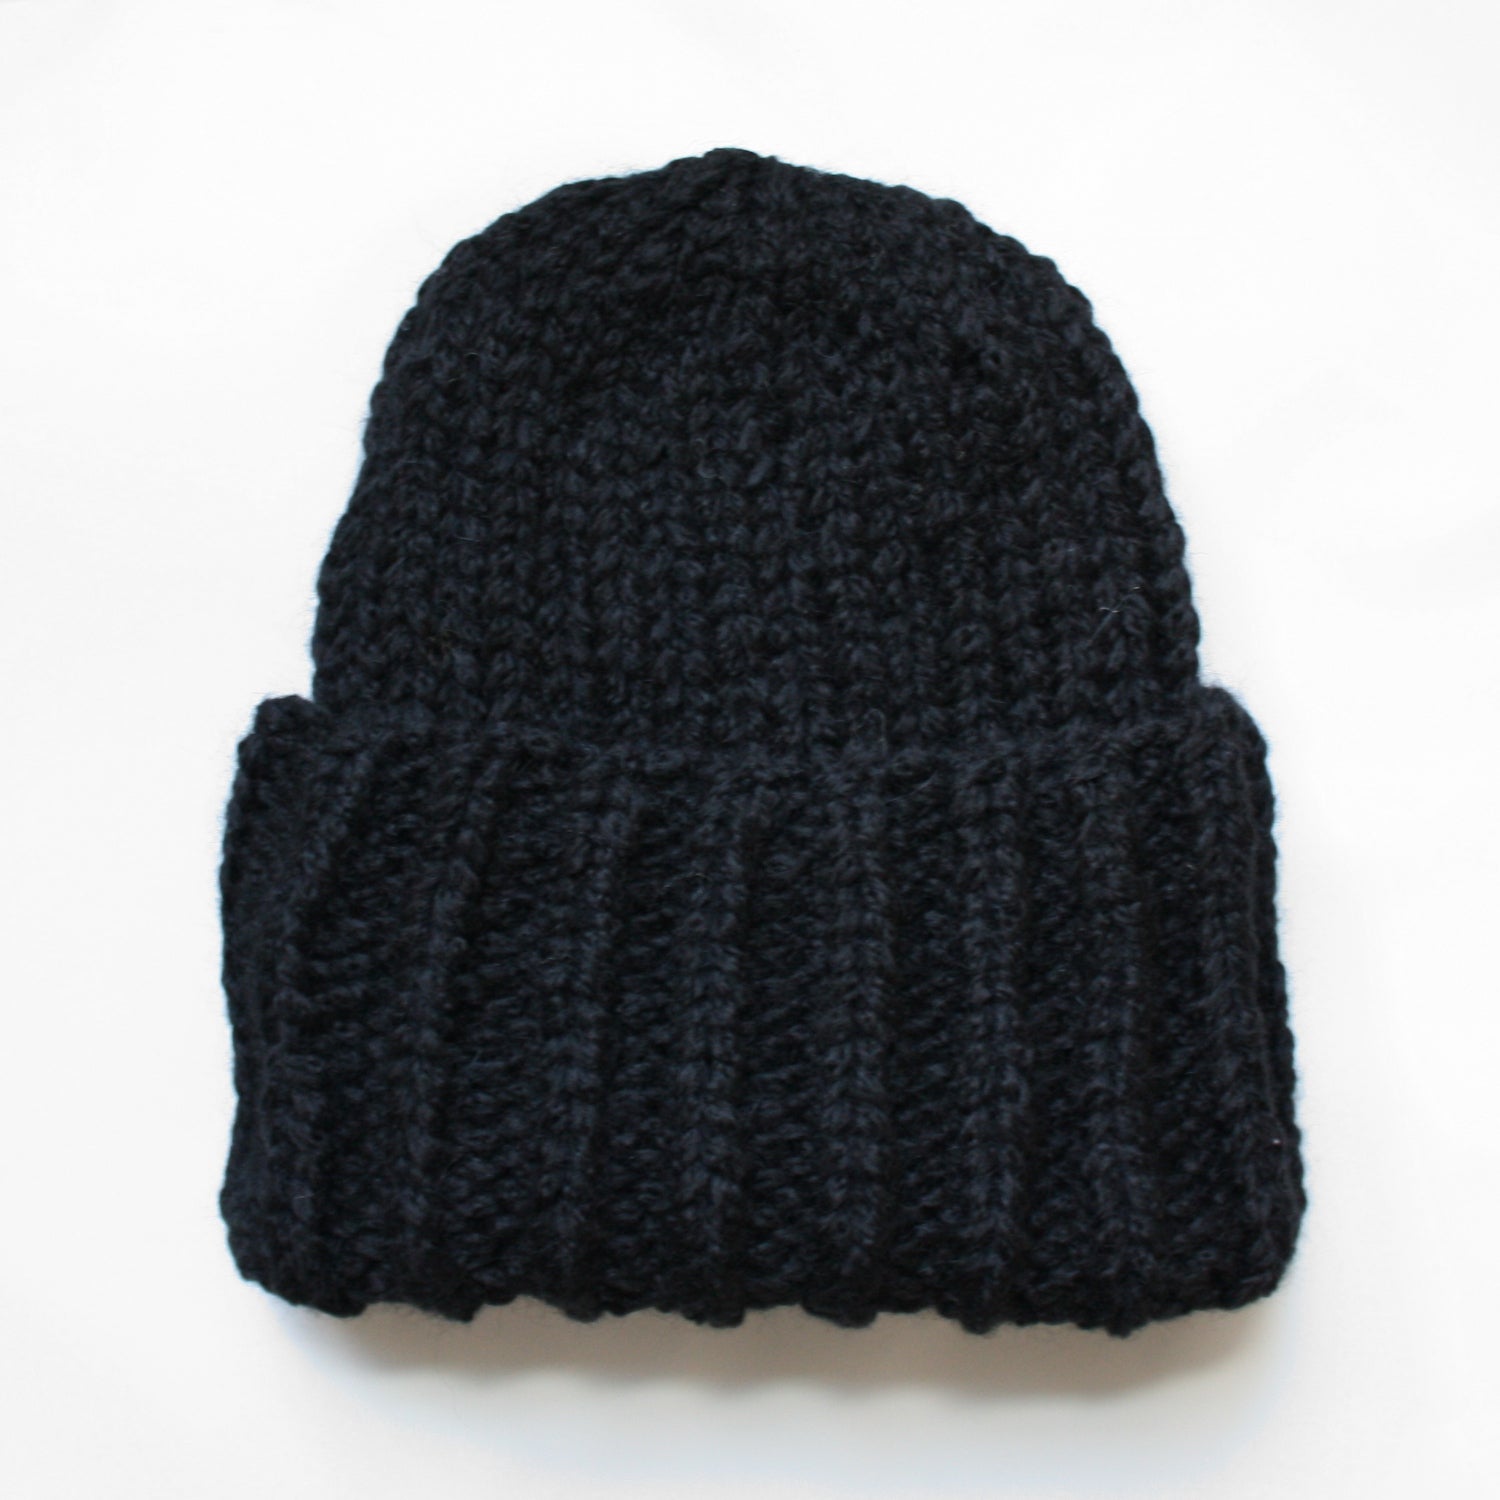 Quarry Toque, Hand Knit in Alpaca Merino Wool, soft and lightweight fall accessory